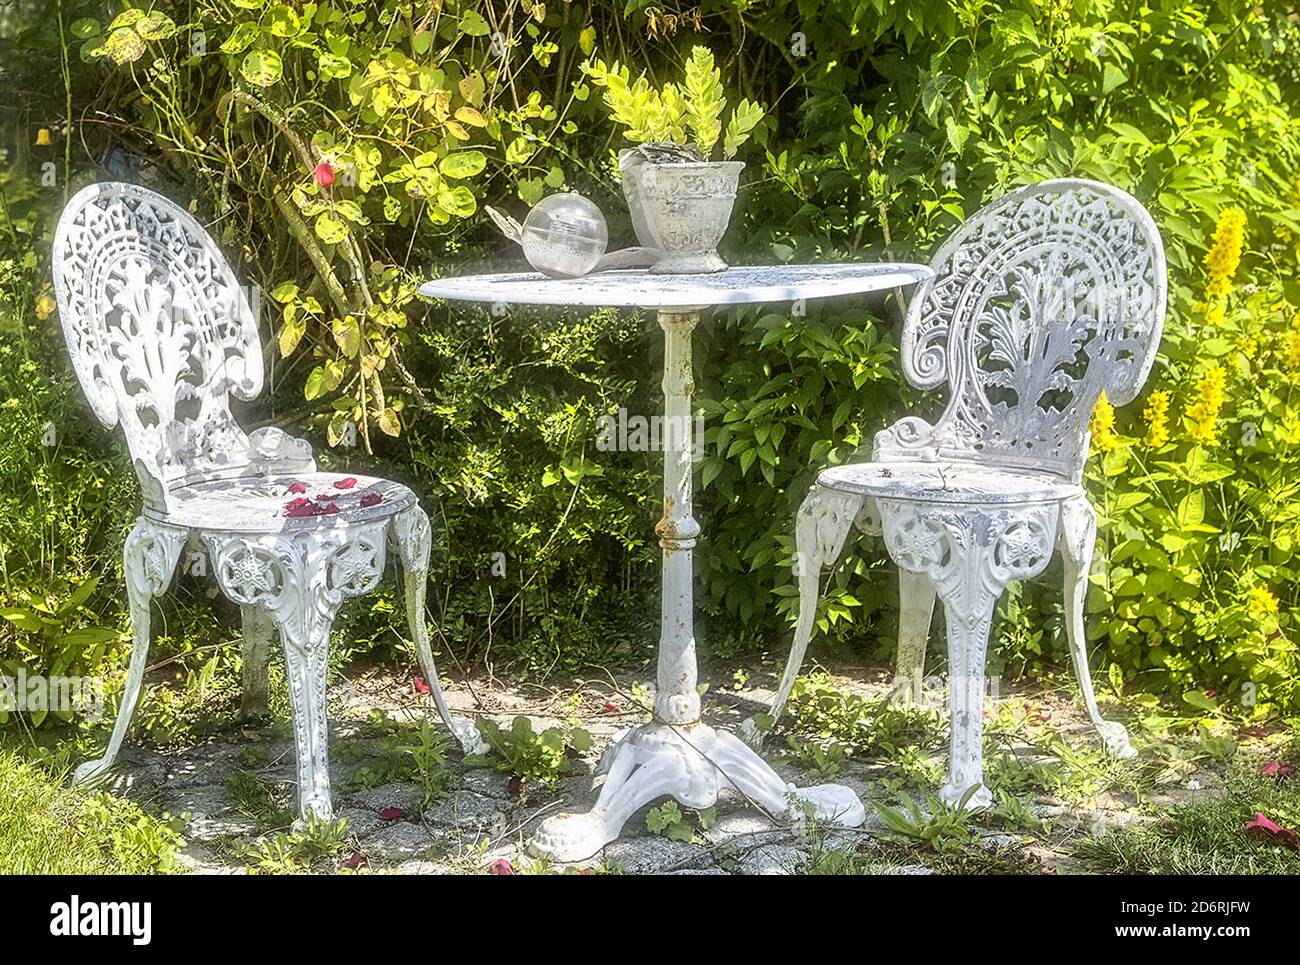 Vintage rusty wrought iron furniture in a garden Stock Photo - Alamy